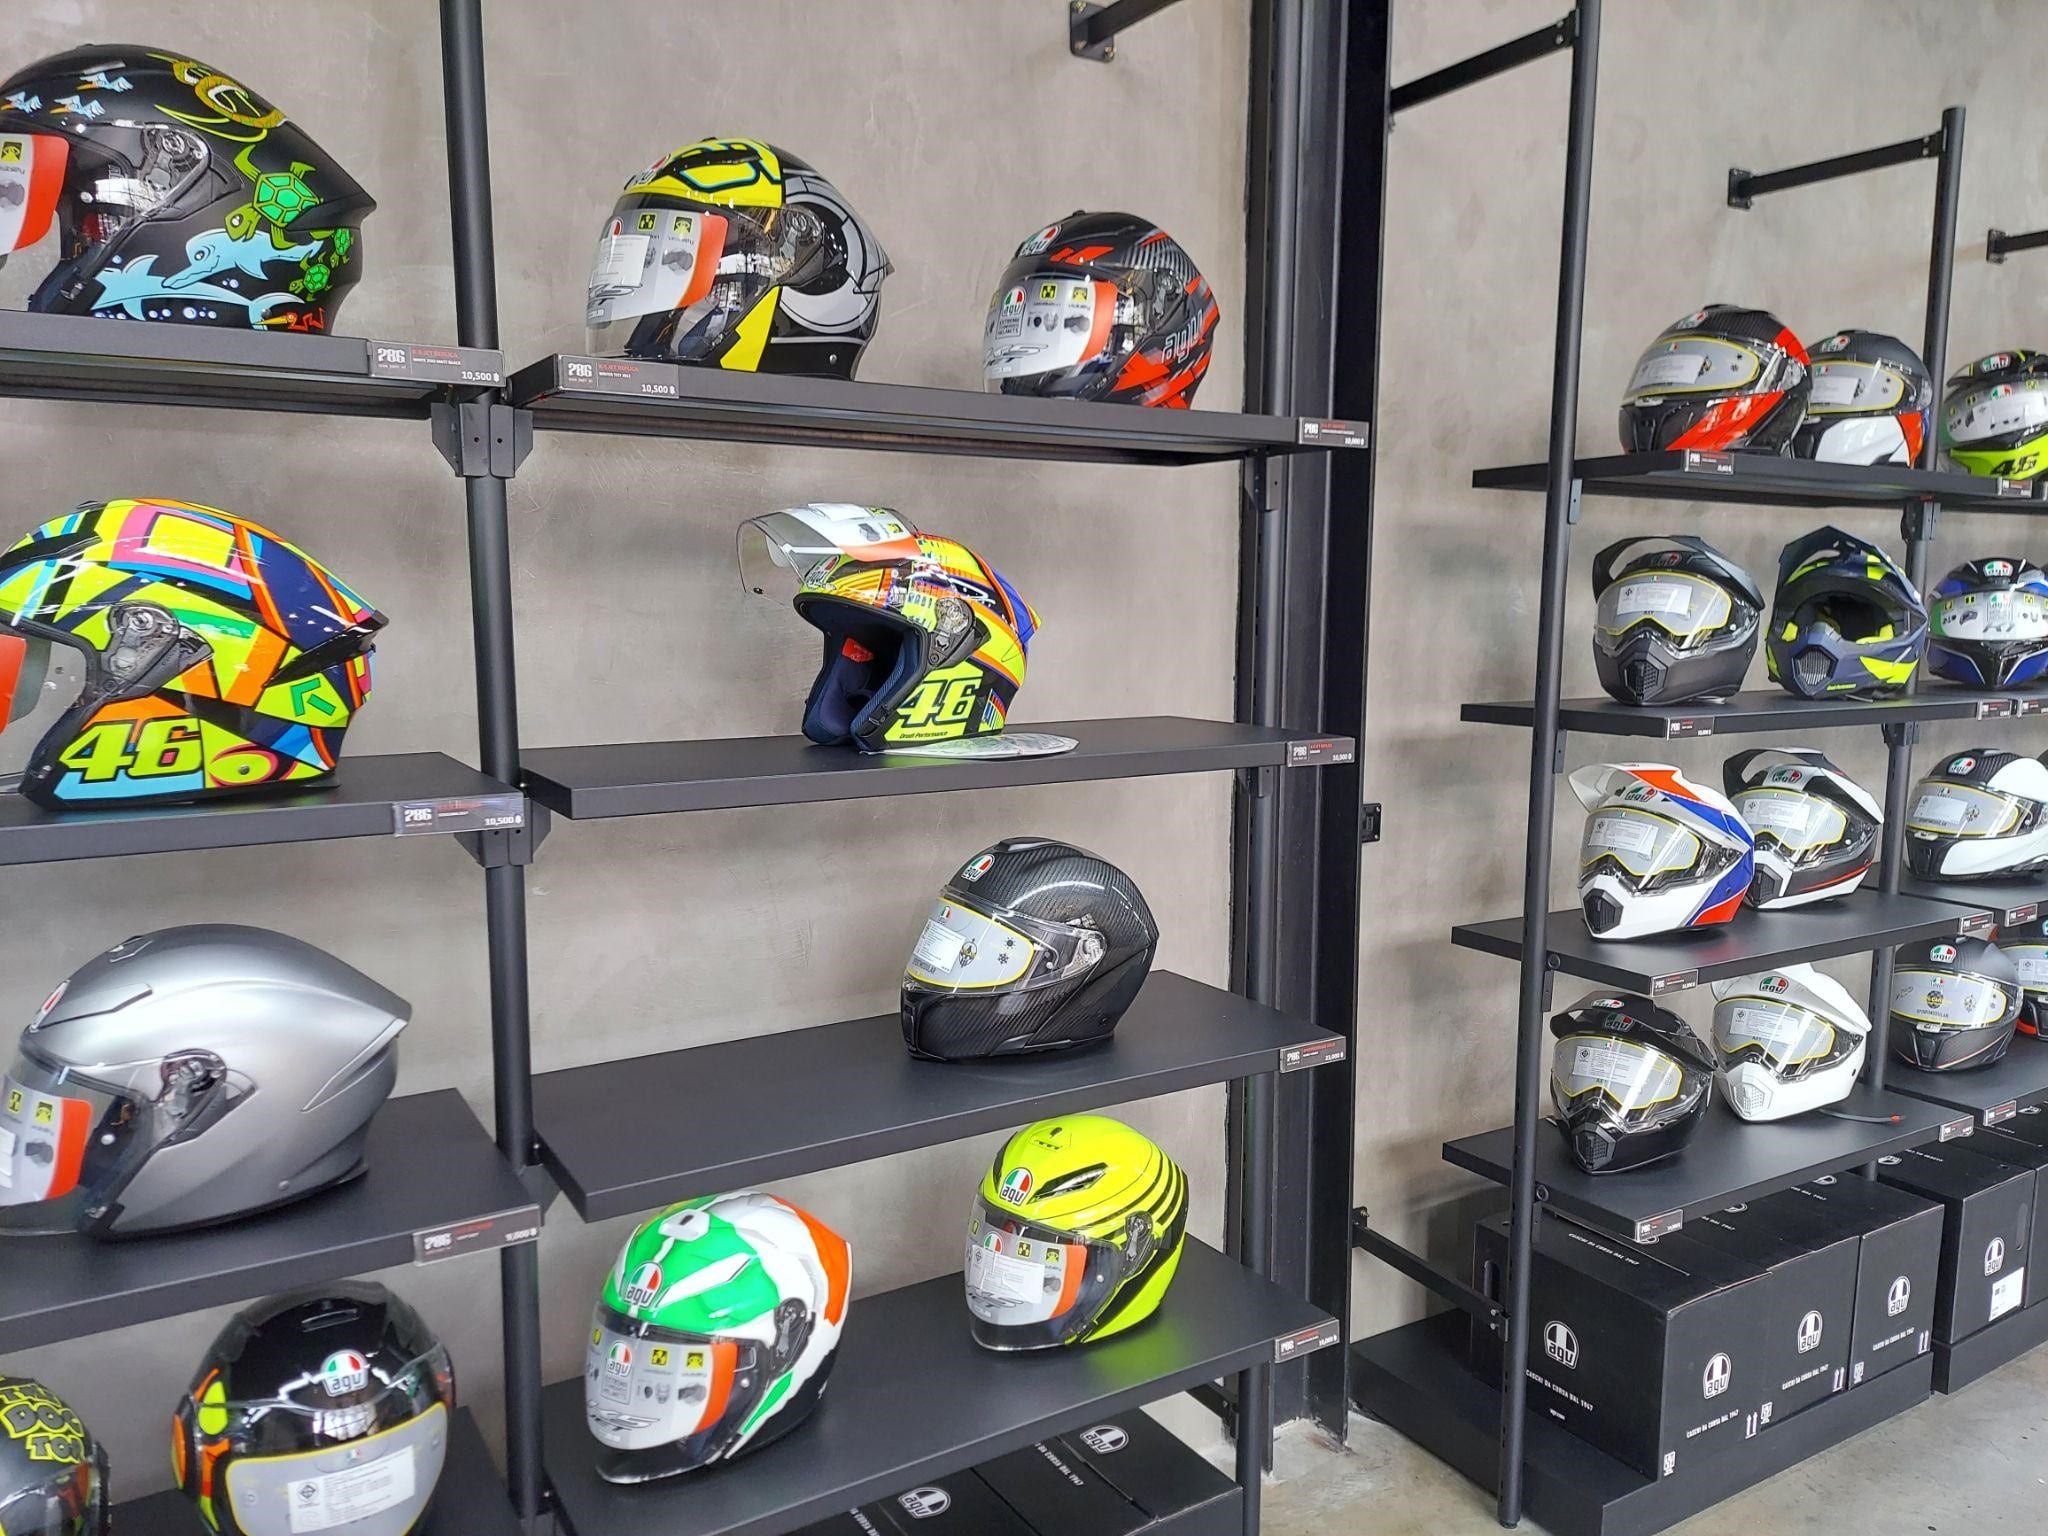 Showcasing AGV open face (left), modular (middle), and full face (right) helmets. Modular helmets, a subset of full-face designs, provide the convenience of an open face with a rounded flip-up chin guard that remains attached.